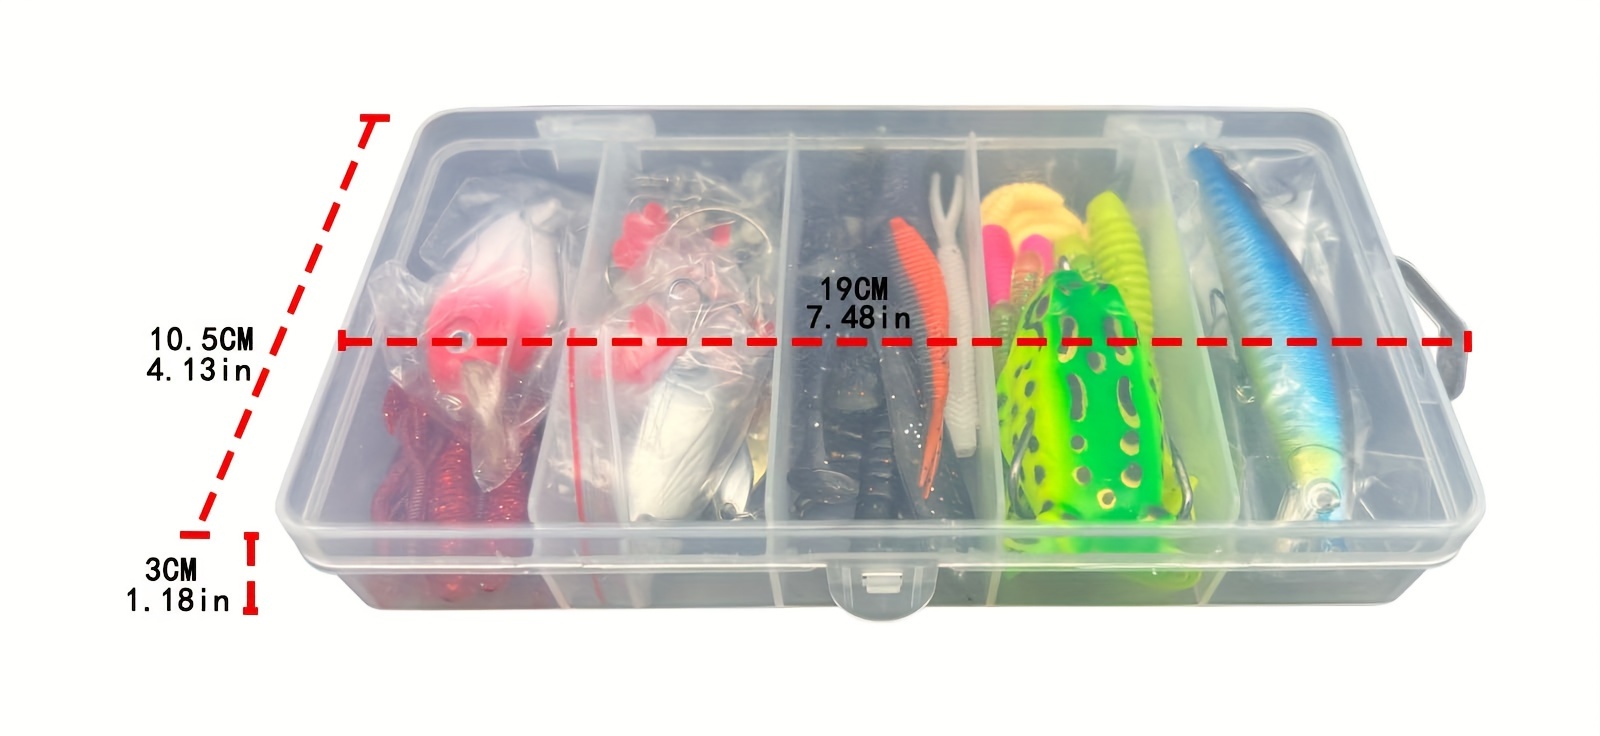 26 107 132 284pcs fishing lures kit tackle box with hard lures spoon lures soft plastic worms swimbaits crankbait jigs hooks for bass trout salmon fishing details 8